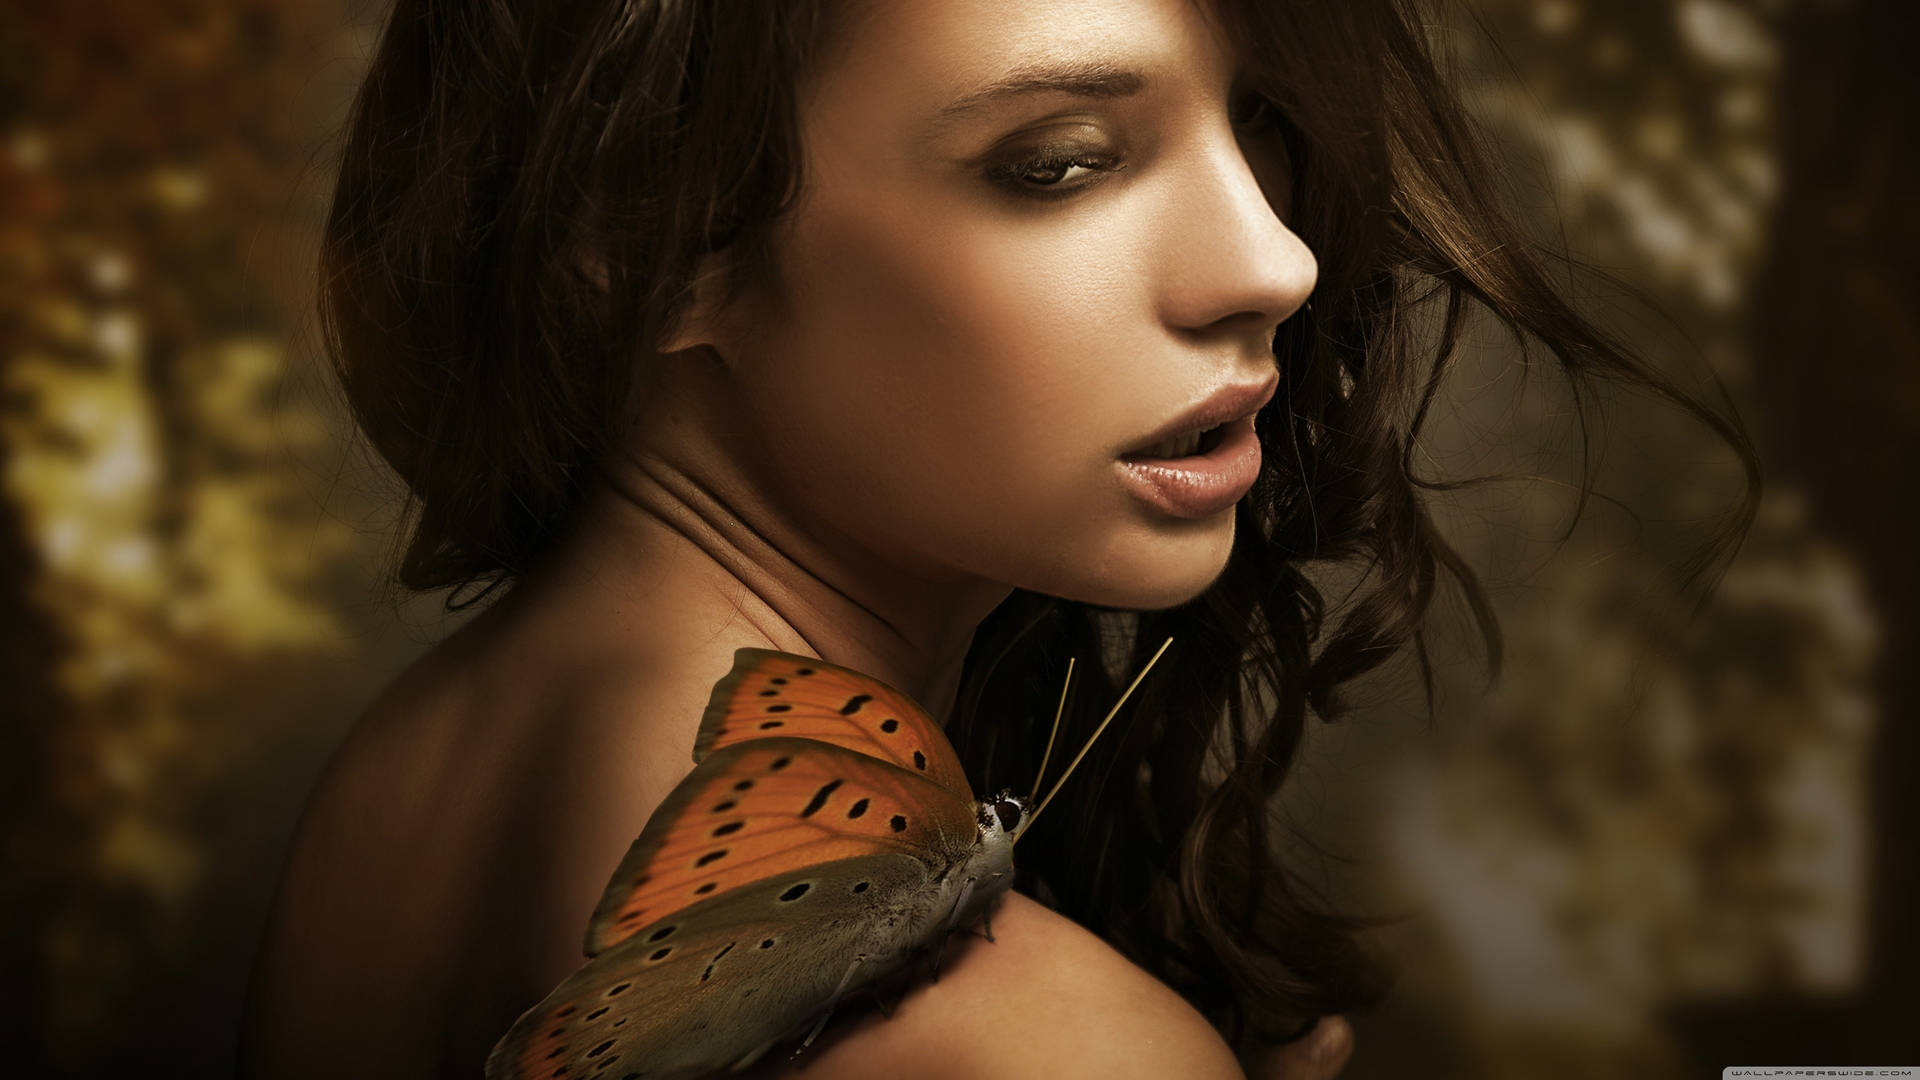 Beautiful Butterfly On Woman's Shoulder Background